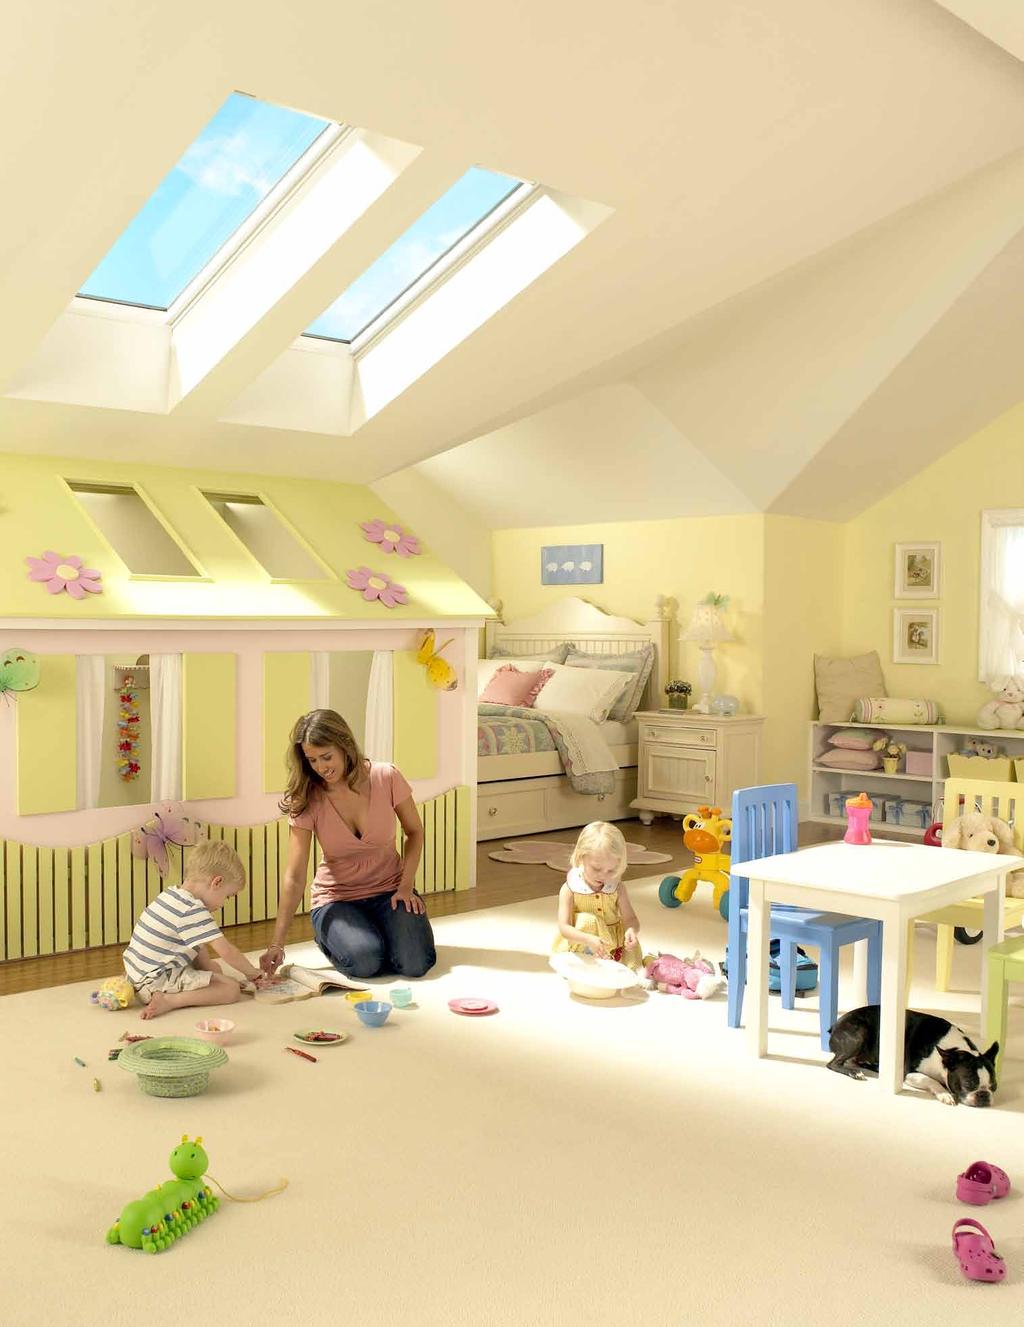 (2) FS M08 Fixed skylights Environmental responsibility Why VELUX skylights Environmental responsibility Throughout the years, we have been highly committed to reducing the environmental impact of